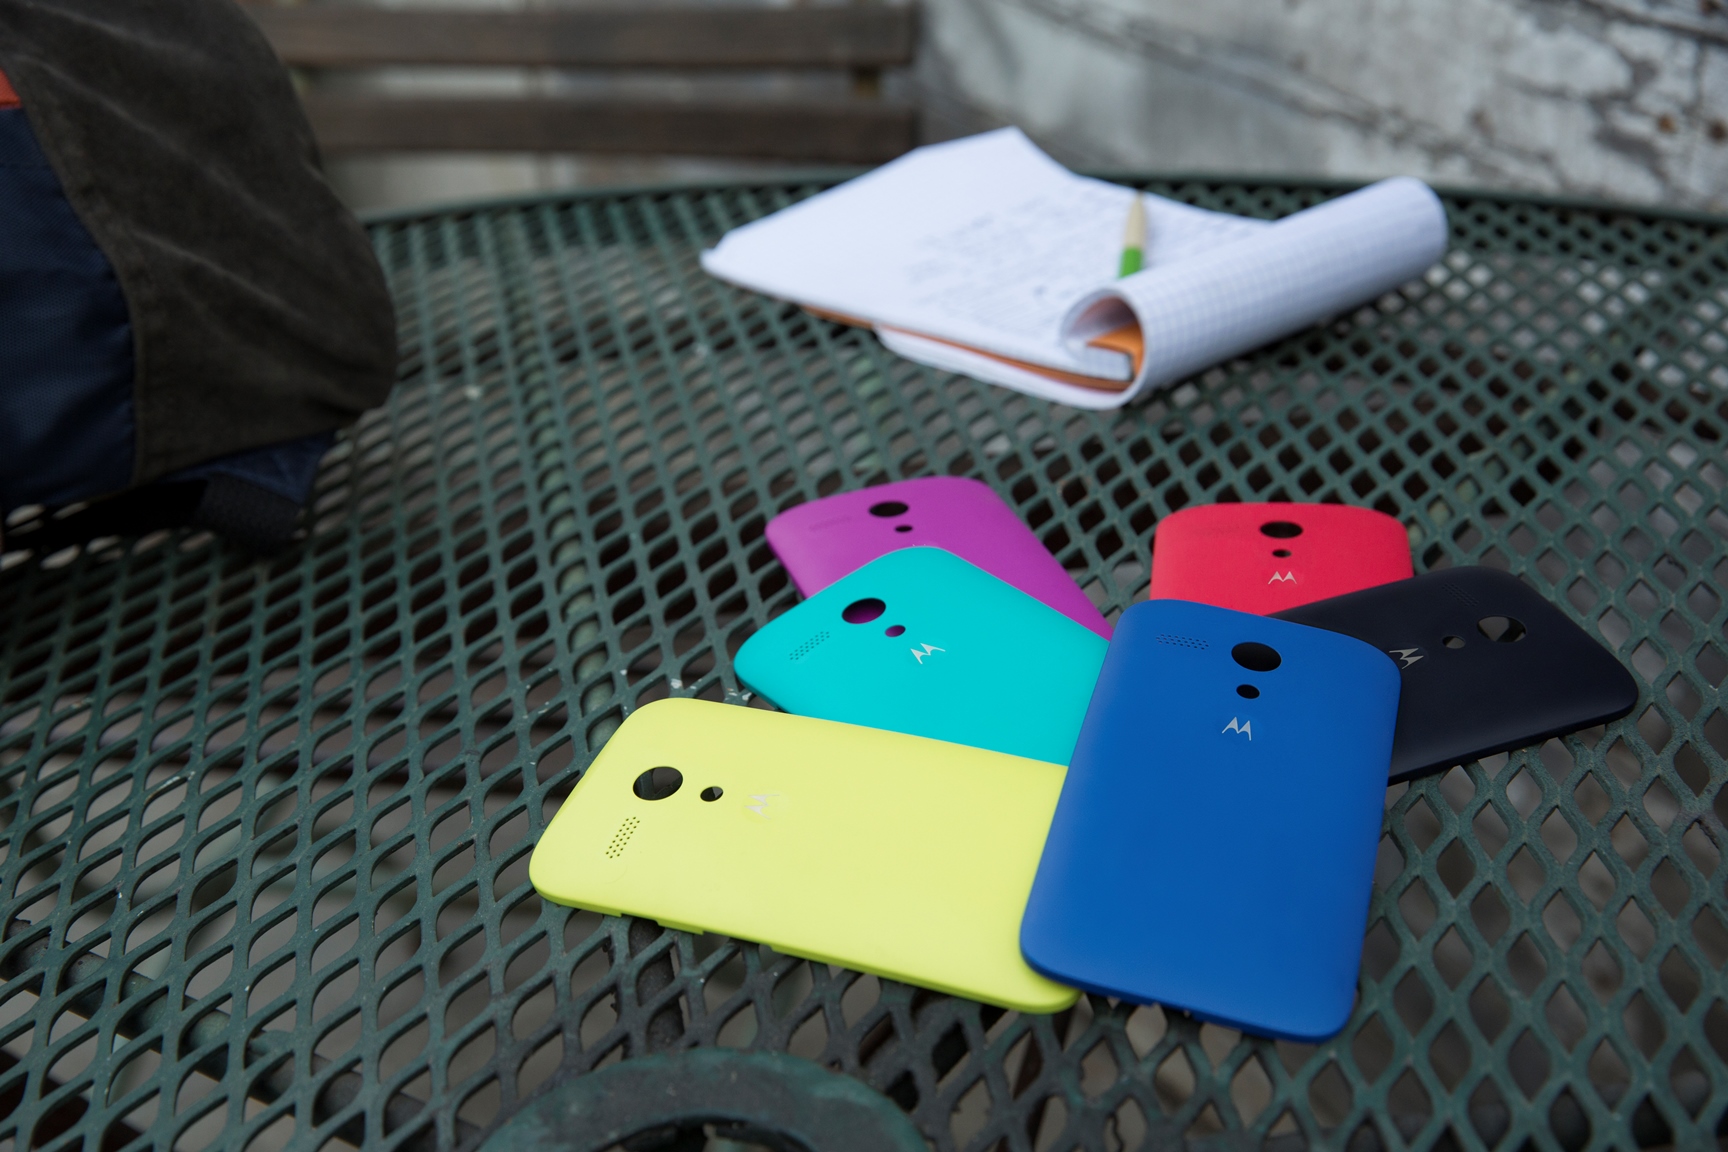 From orange to blue, Moto G shells can be changed whenever the mood strikes.